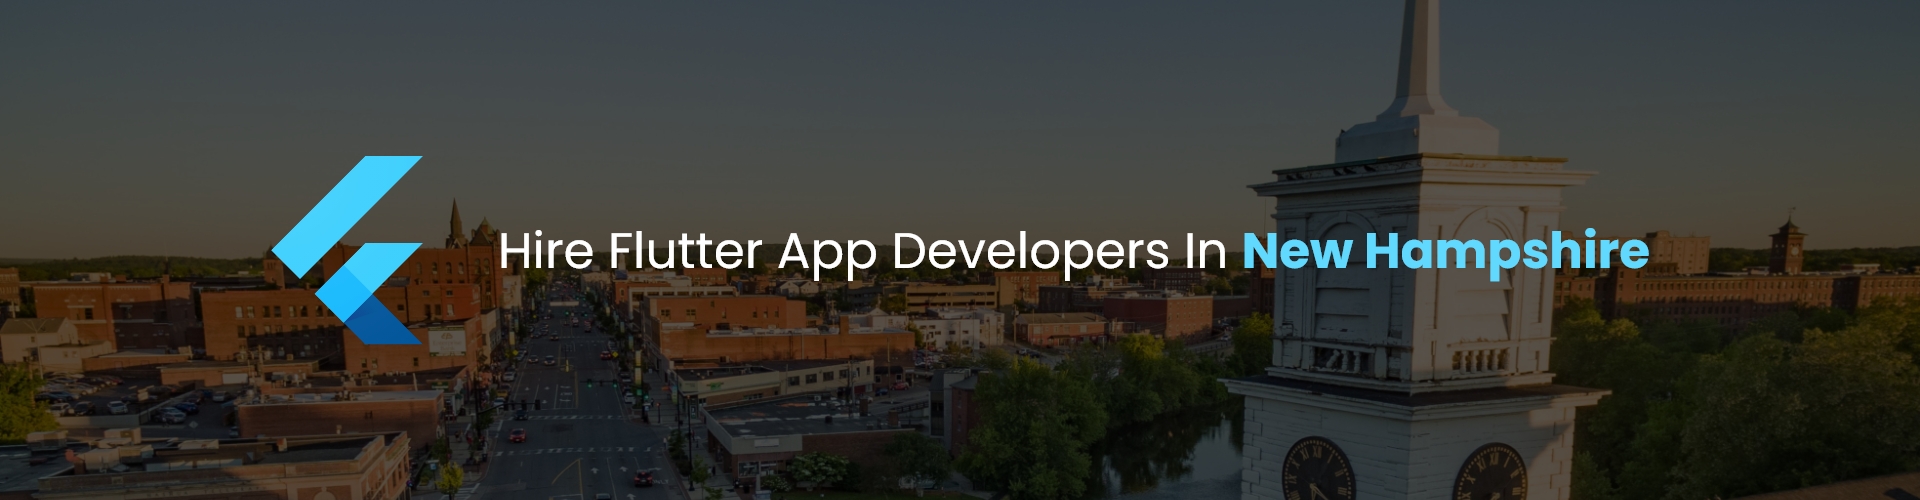 hire flutter app developers in new hampshire